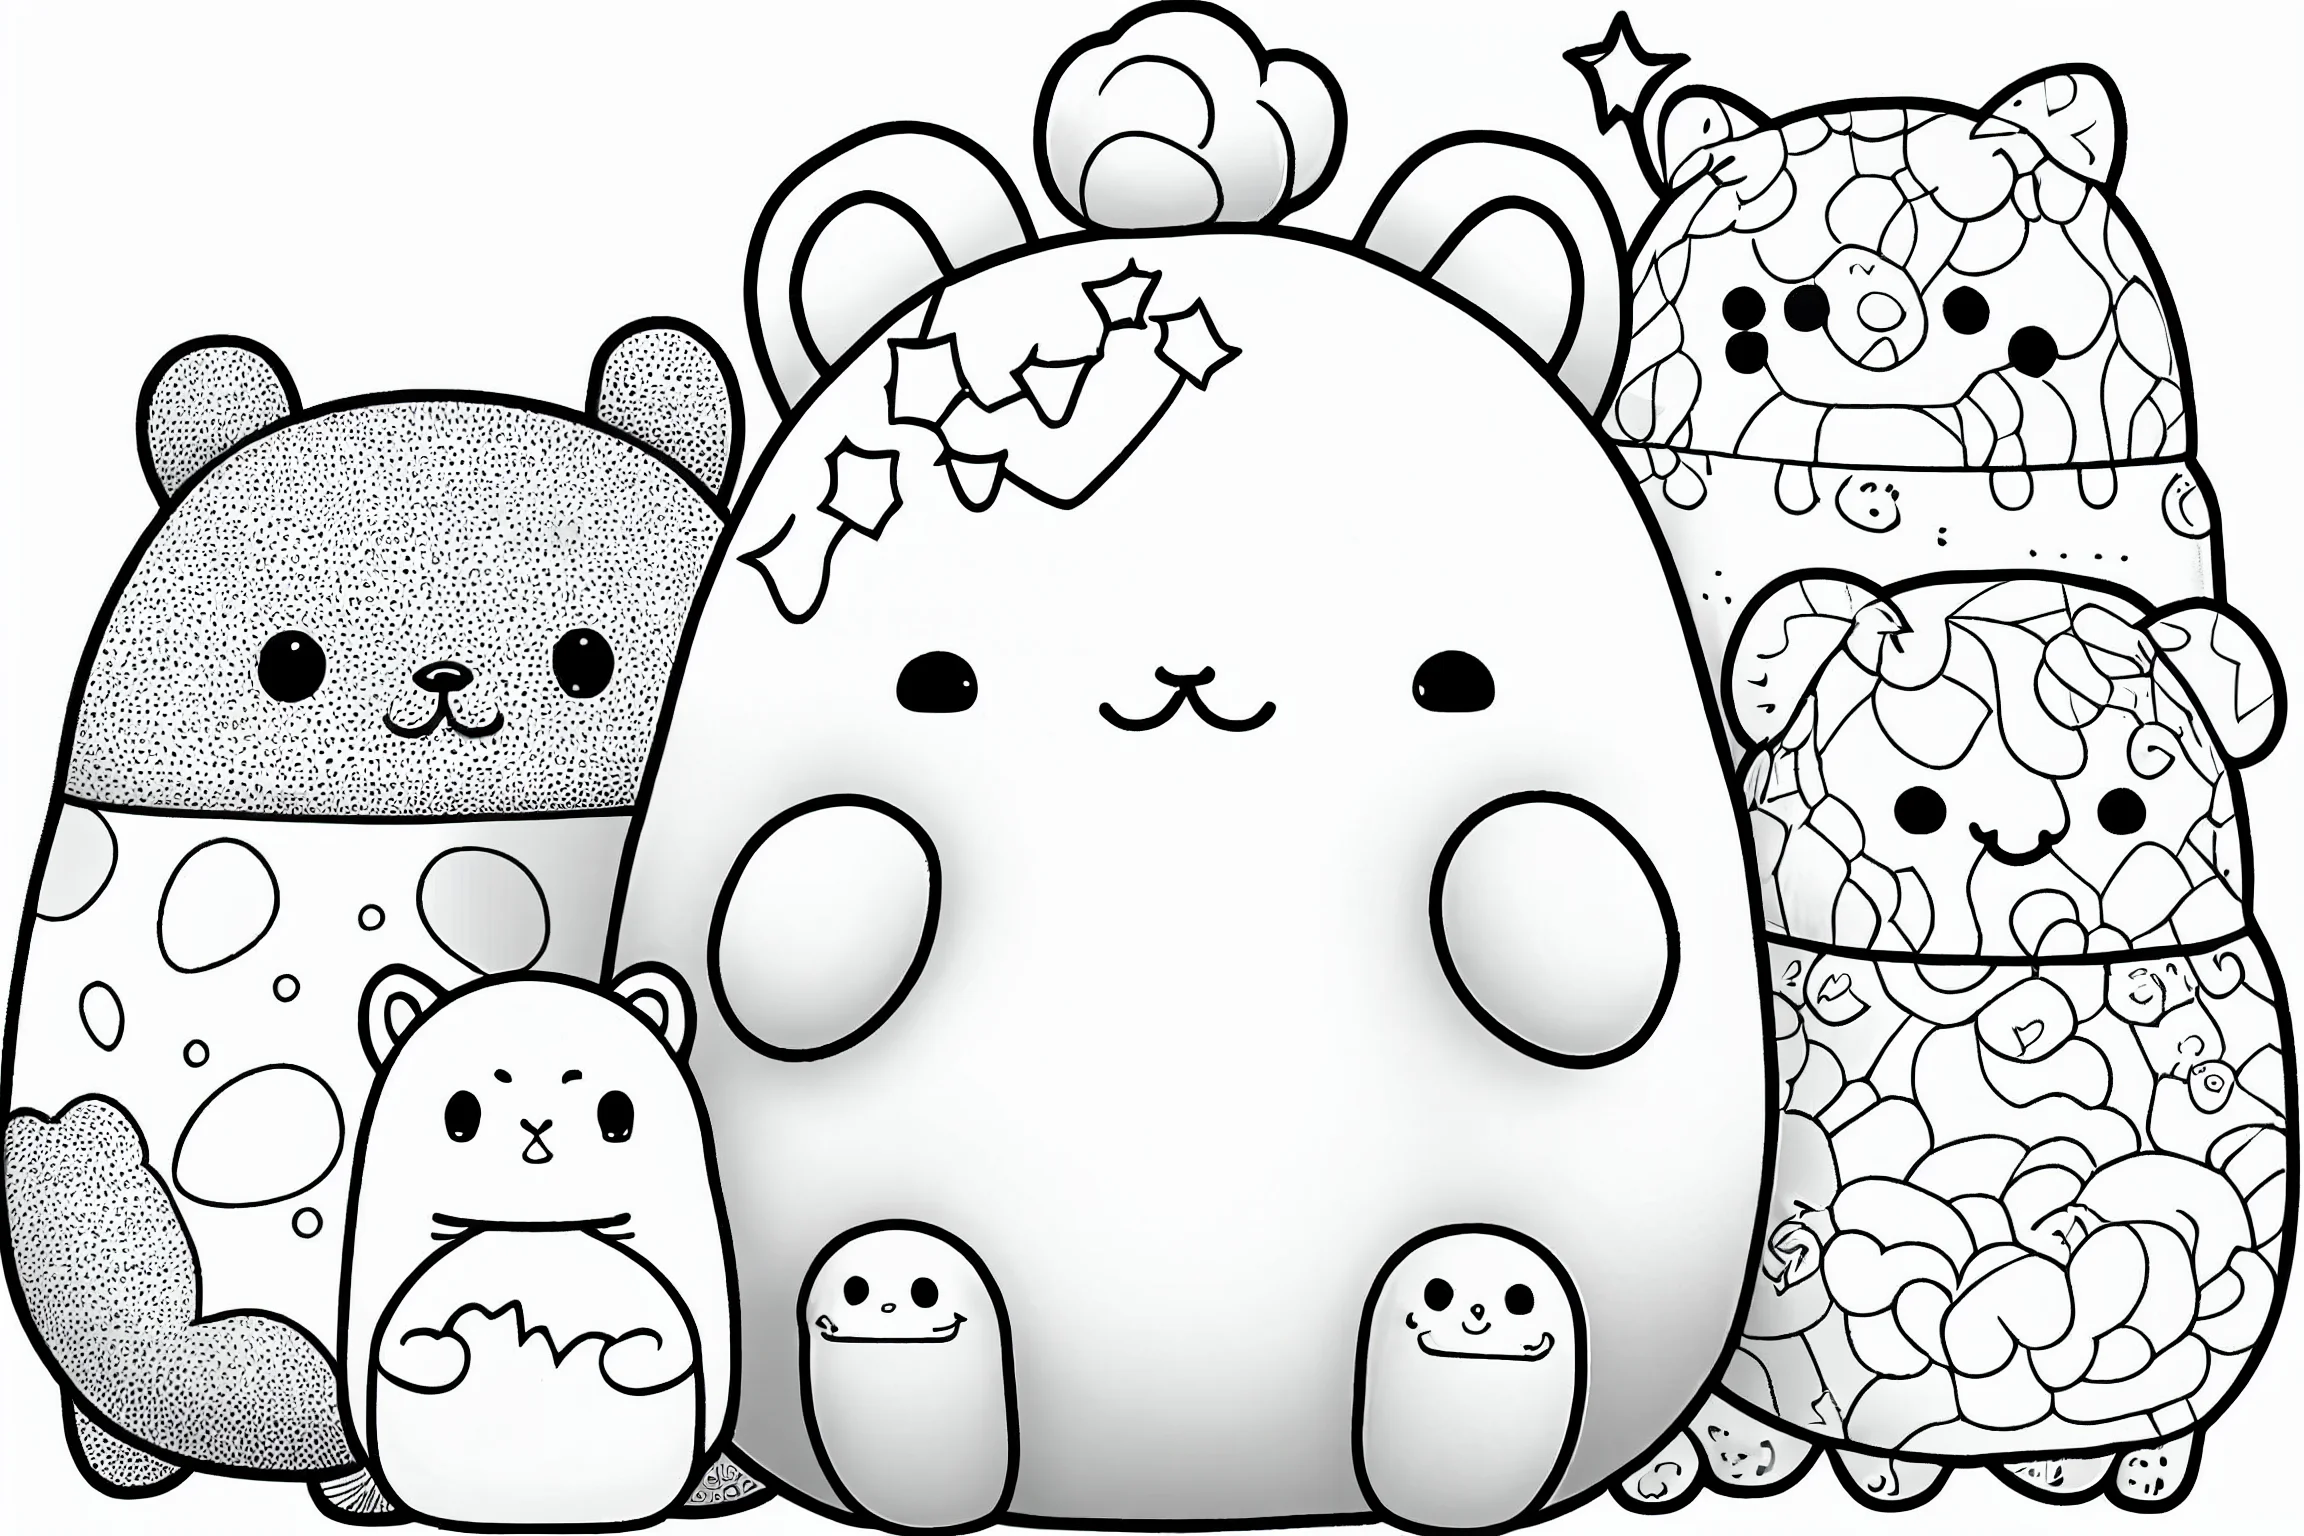 squishmallow-coloring-page-printable-squishmallow-coloring-page-squishmallow-downloadable